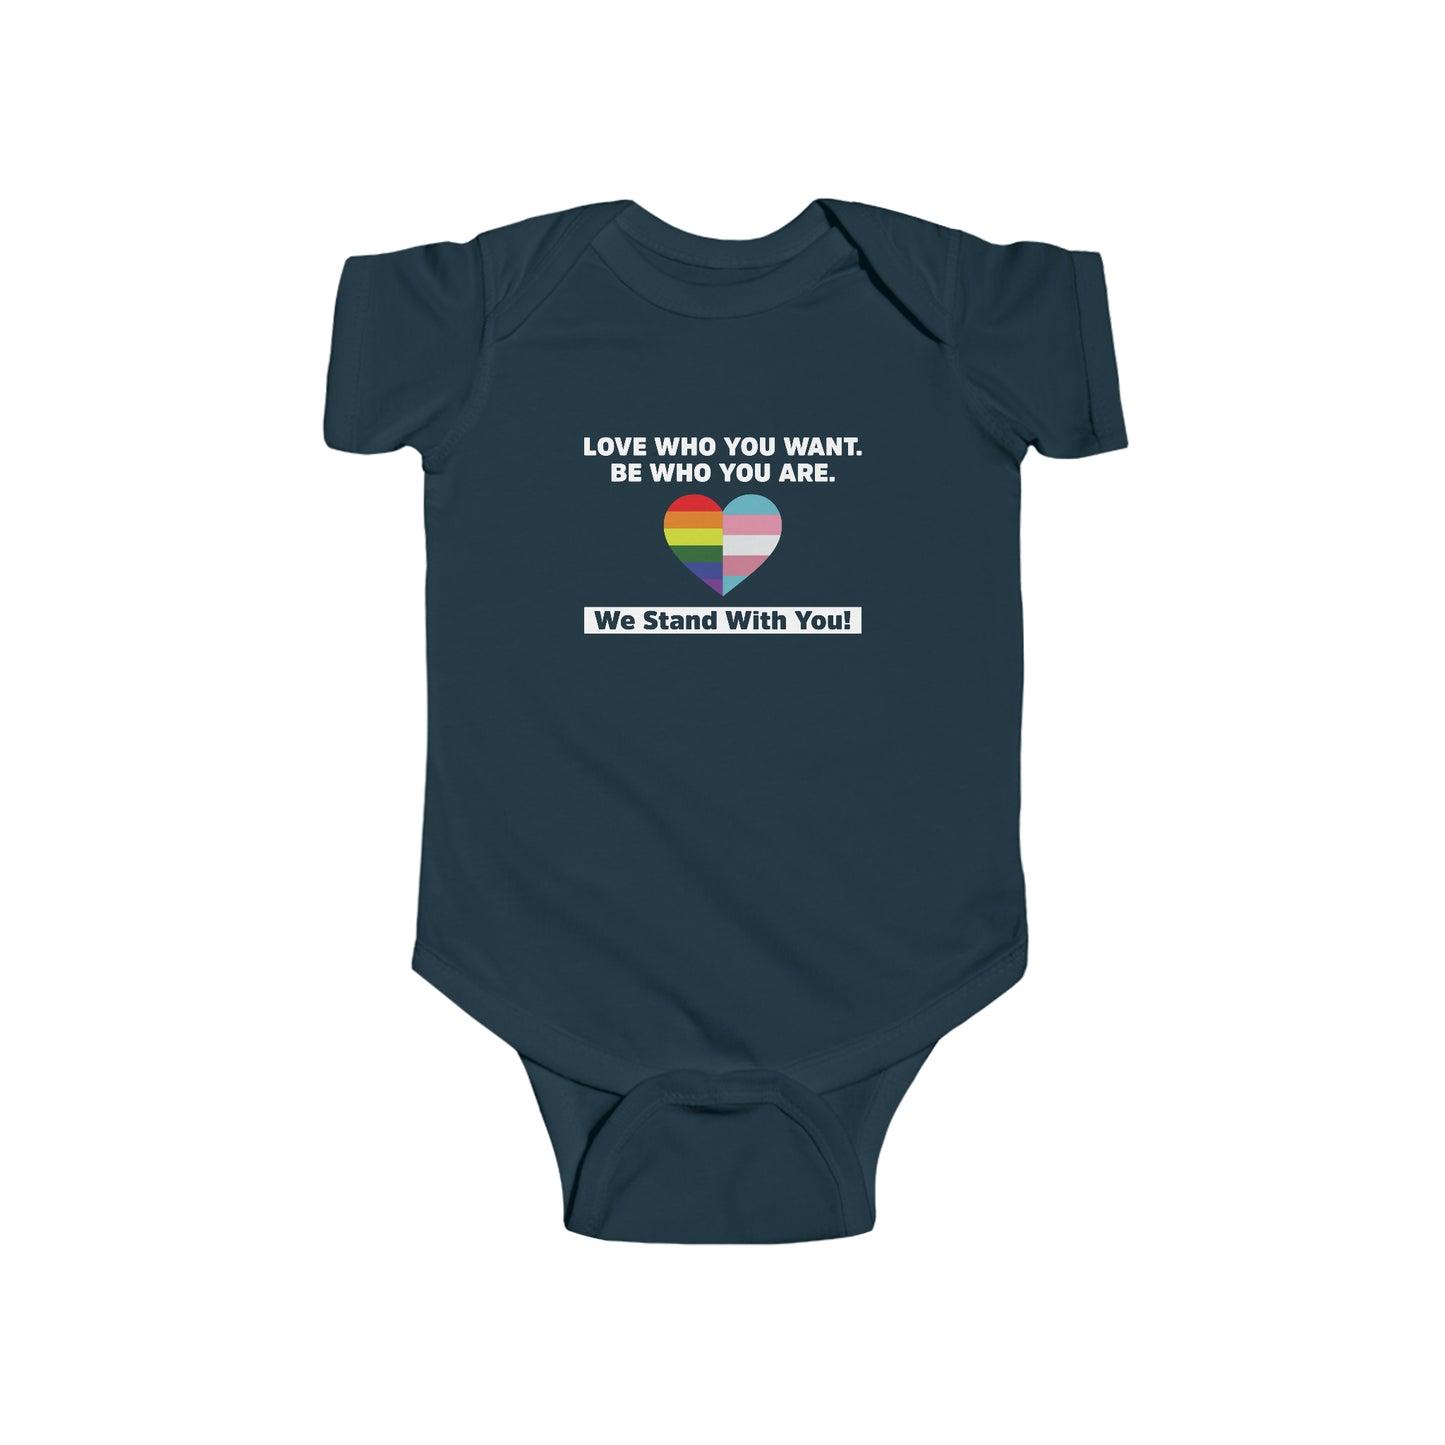 "Love Who You Want" Infant Onesie